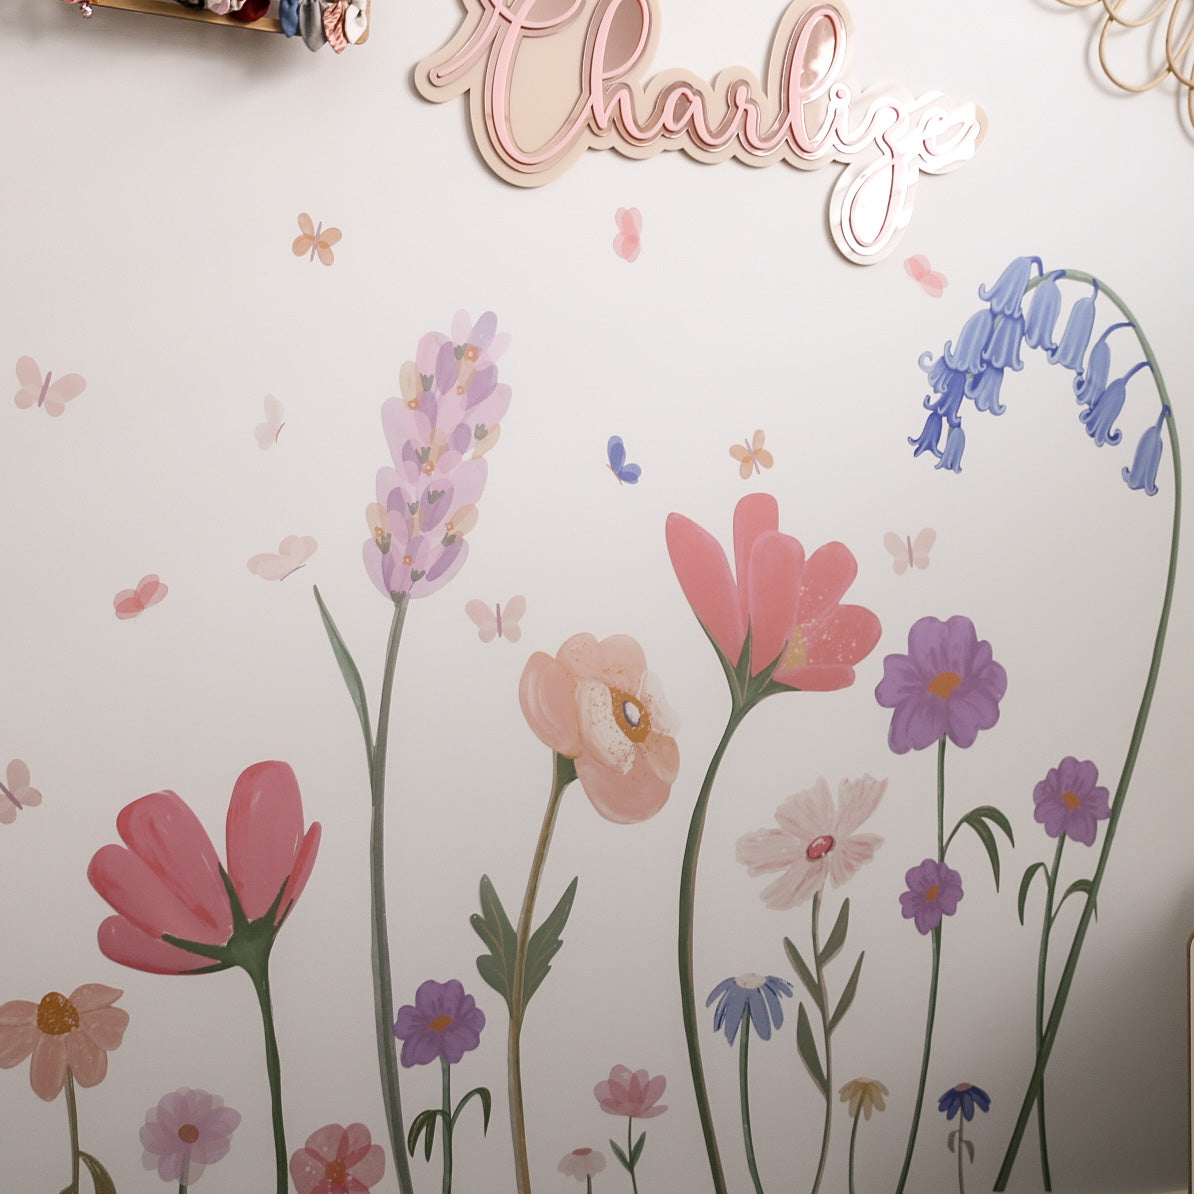 Grande Garden Party | Removable PhotoTex Wall Decals | Blond + Noir